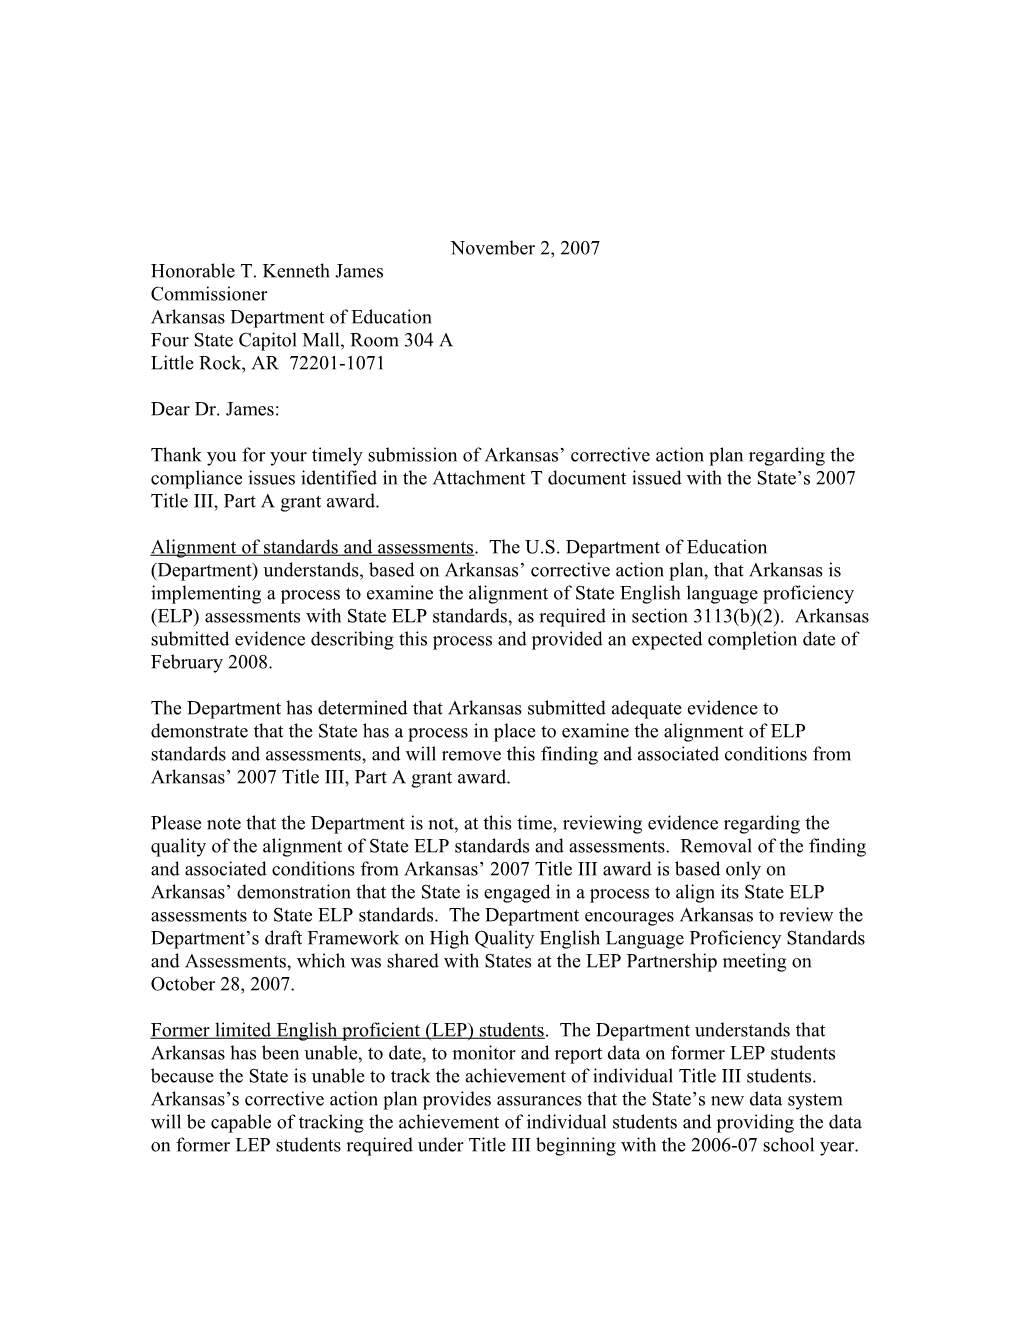 Letter Regarding the Title III, Part a Grant Award Made to Arkansas MS Word